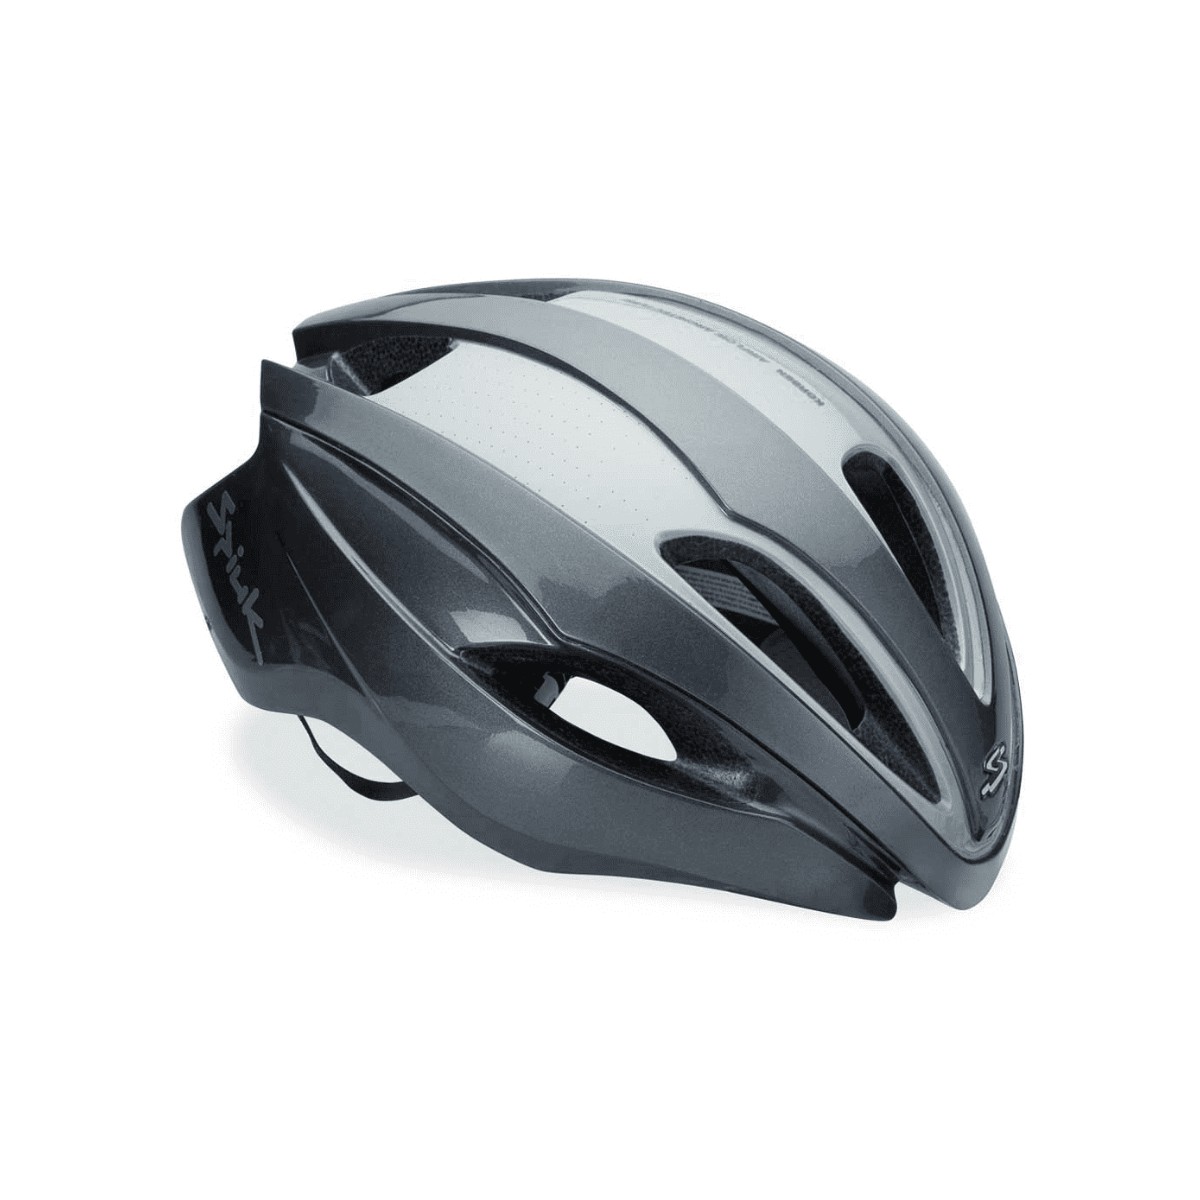 Casque Spiuk Korben Anthracite Argent, Taille S-M